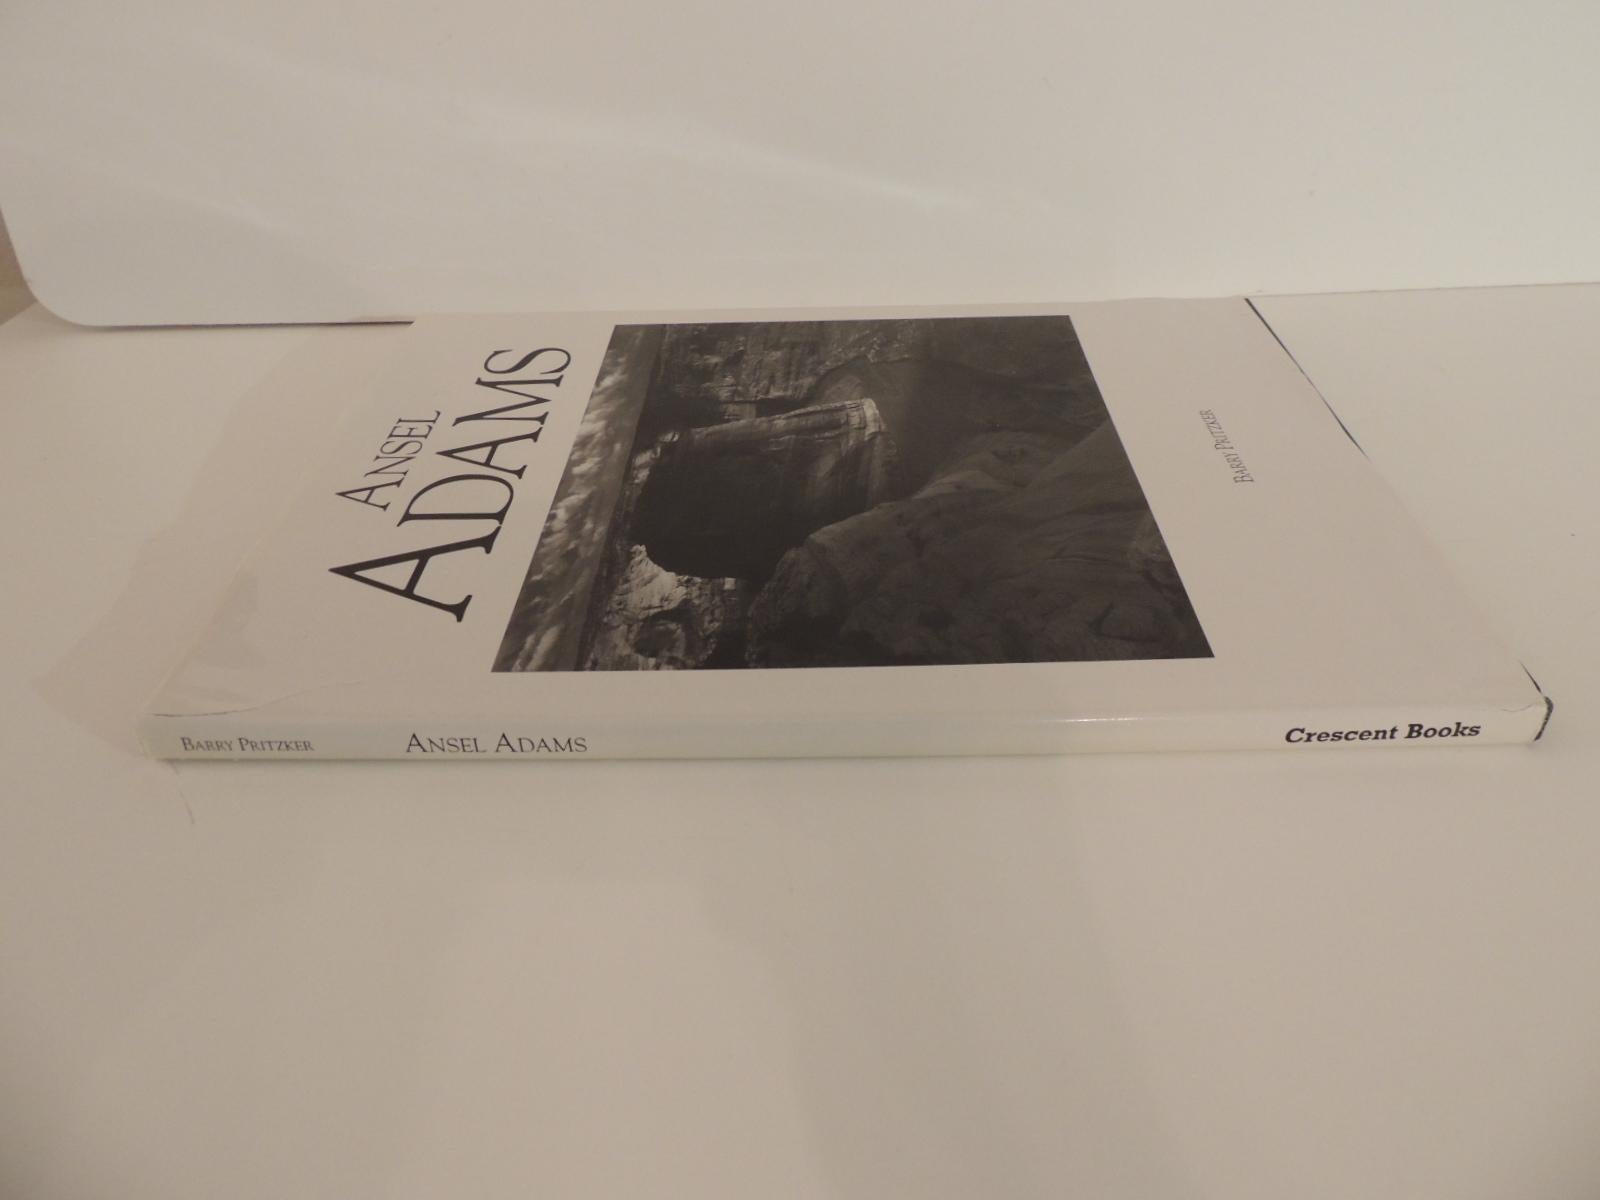 Vintage decorative hardcover book Ansel Adams by Barry Pritzker
192 pages in black and white
Brompton Books, 1991
Greenwich CT
Size: 14.5 10.5 x 0.25.
  